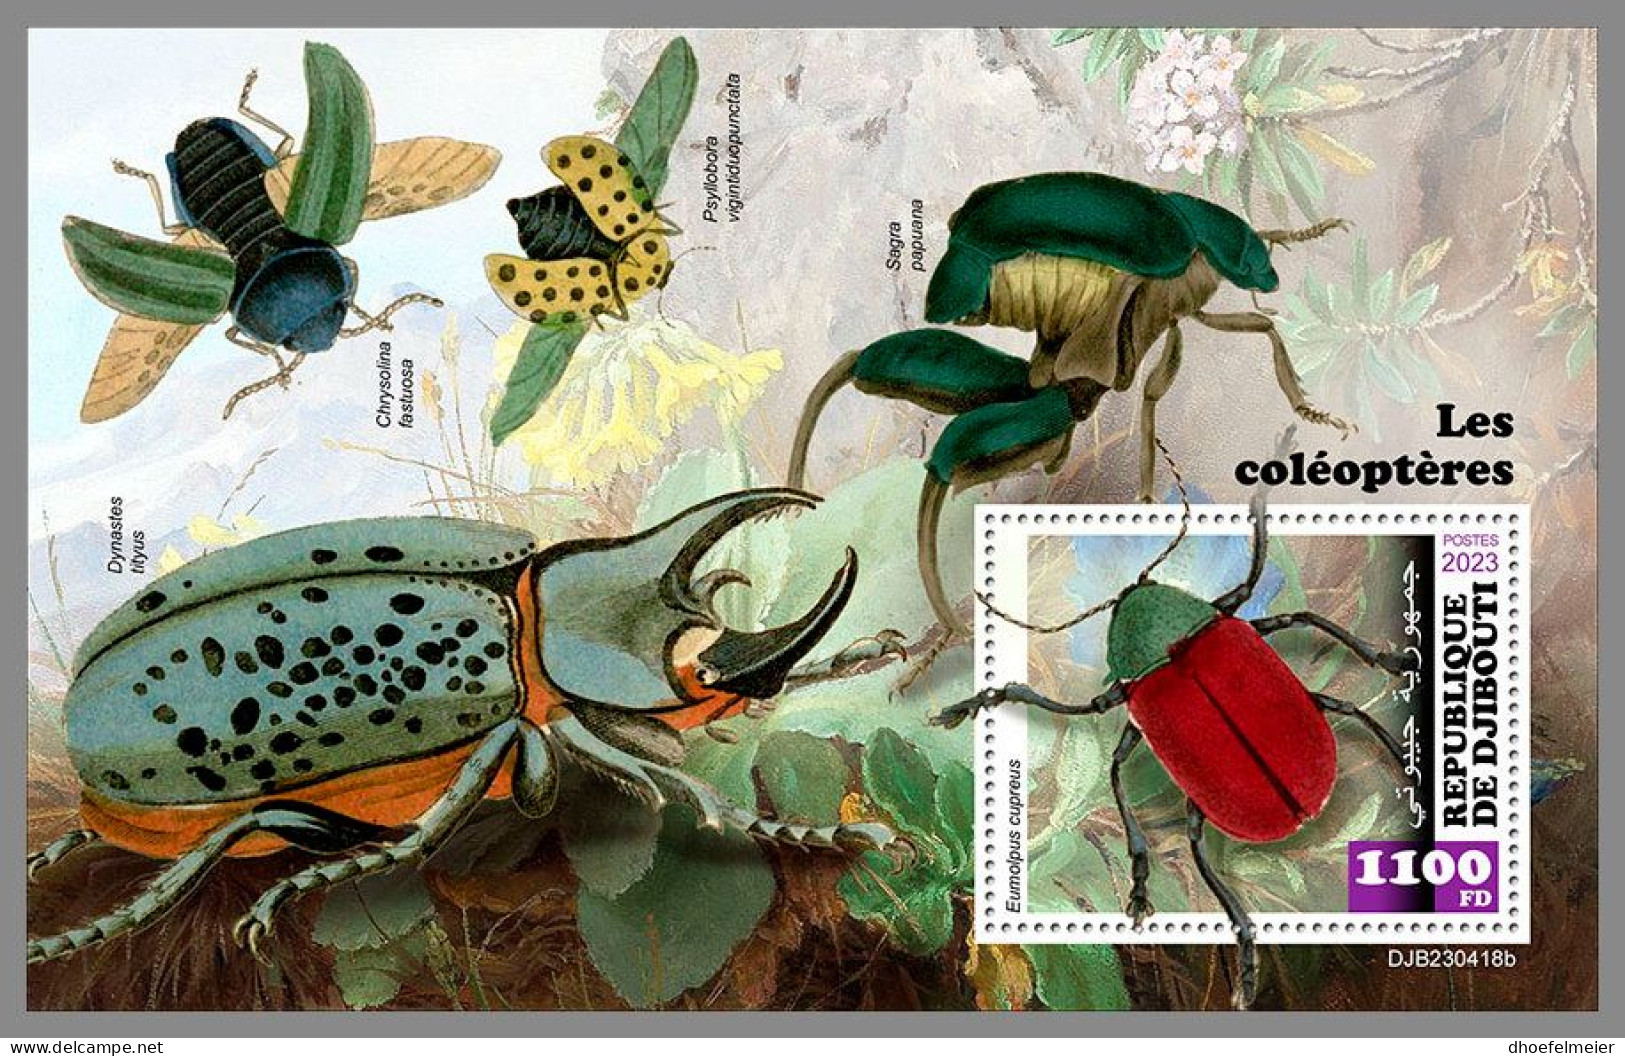 DJIBOUTI 2023 MNH Beetles Käfer S/S – OFFICIAL ISSUE – DHQ2420 - Beetles